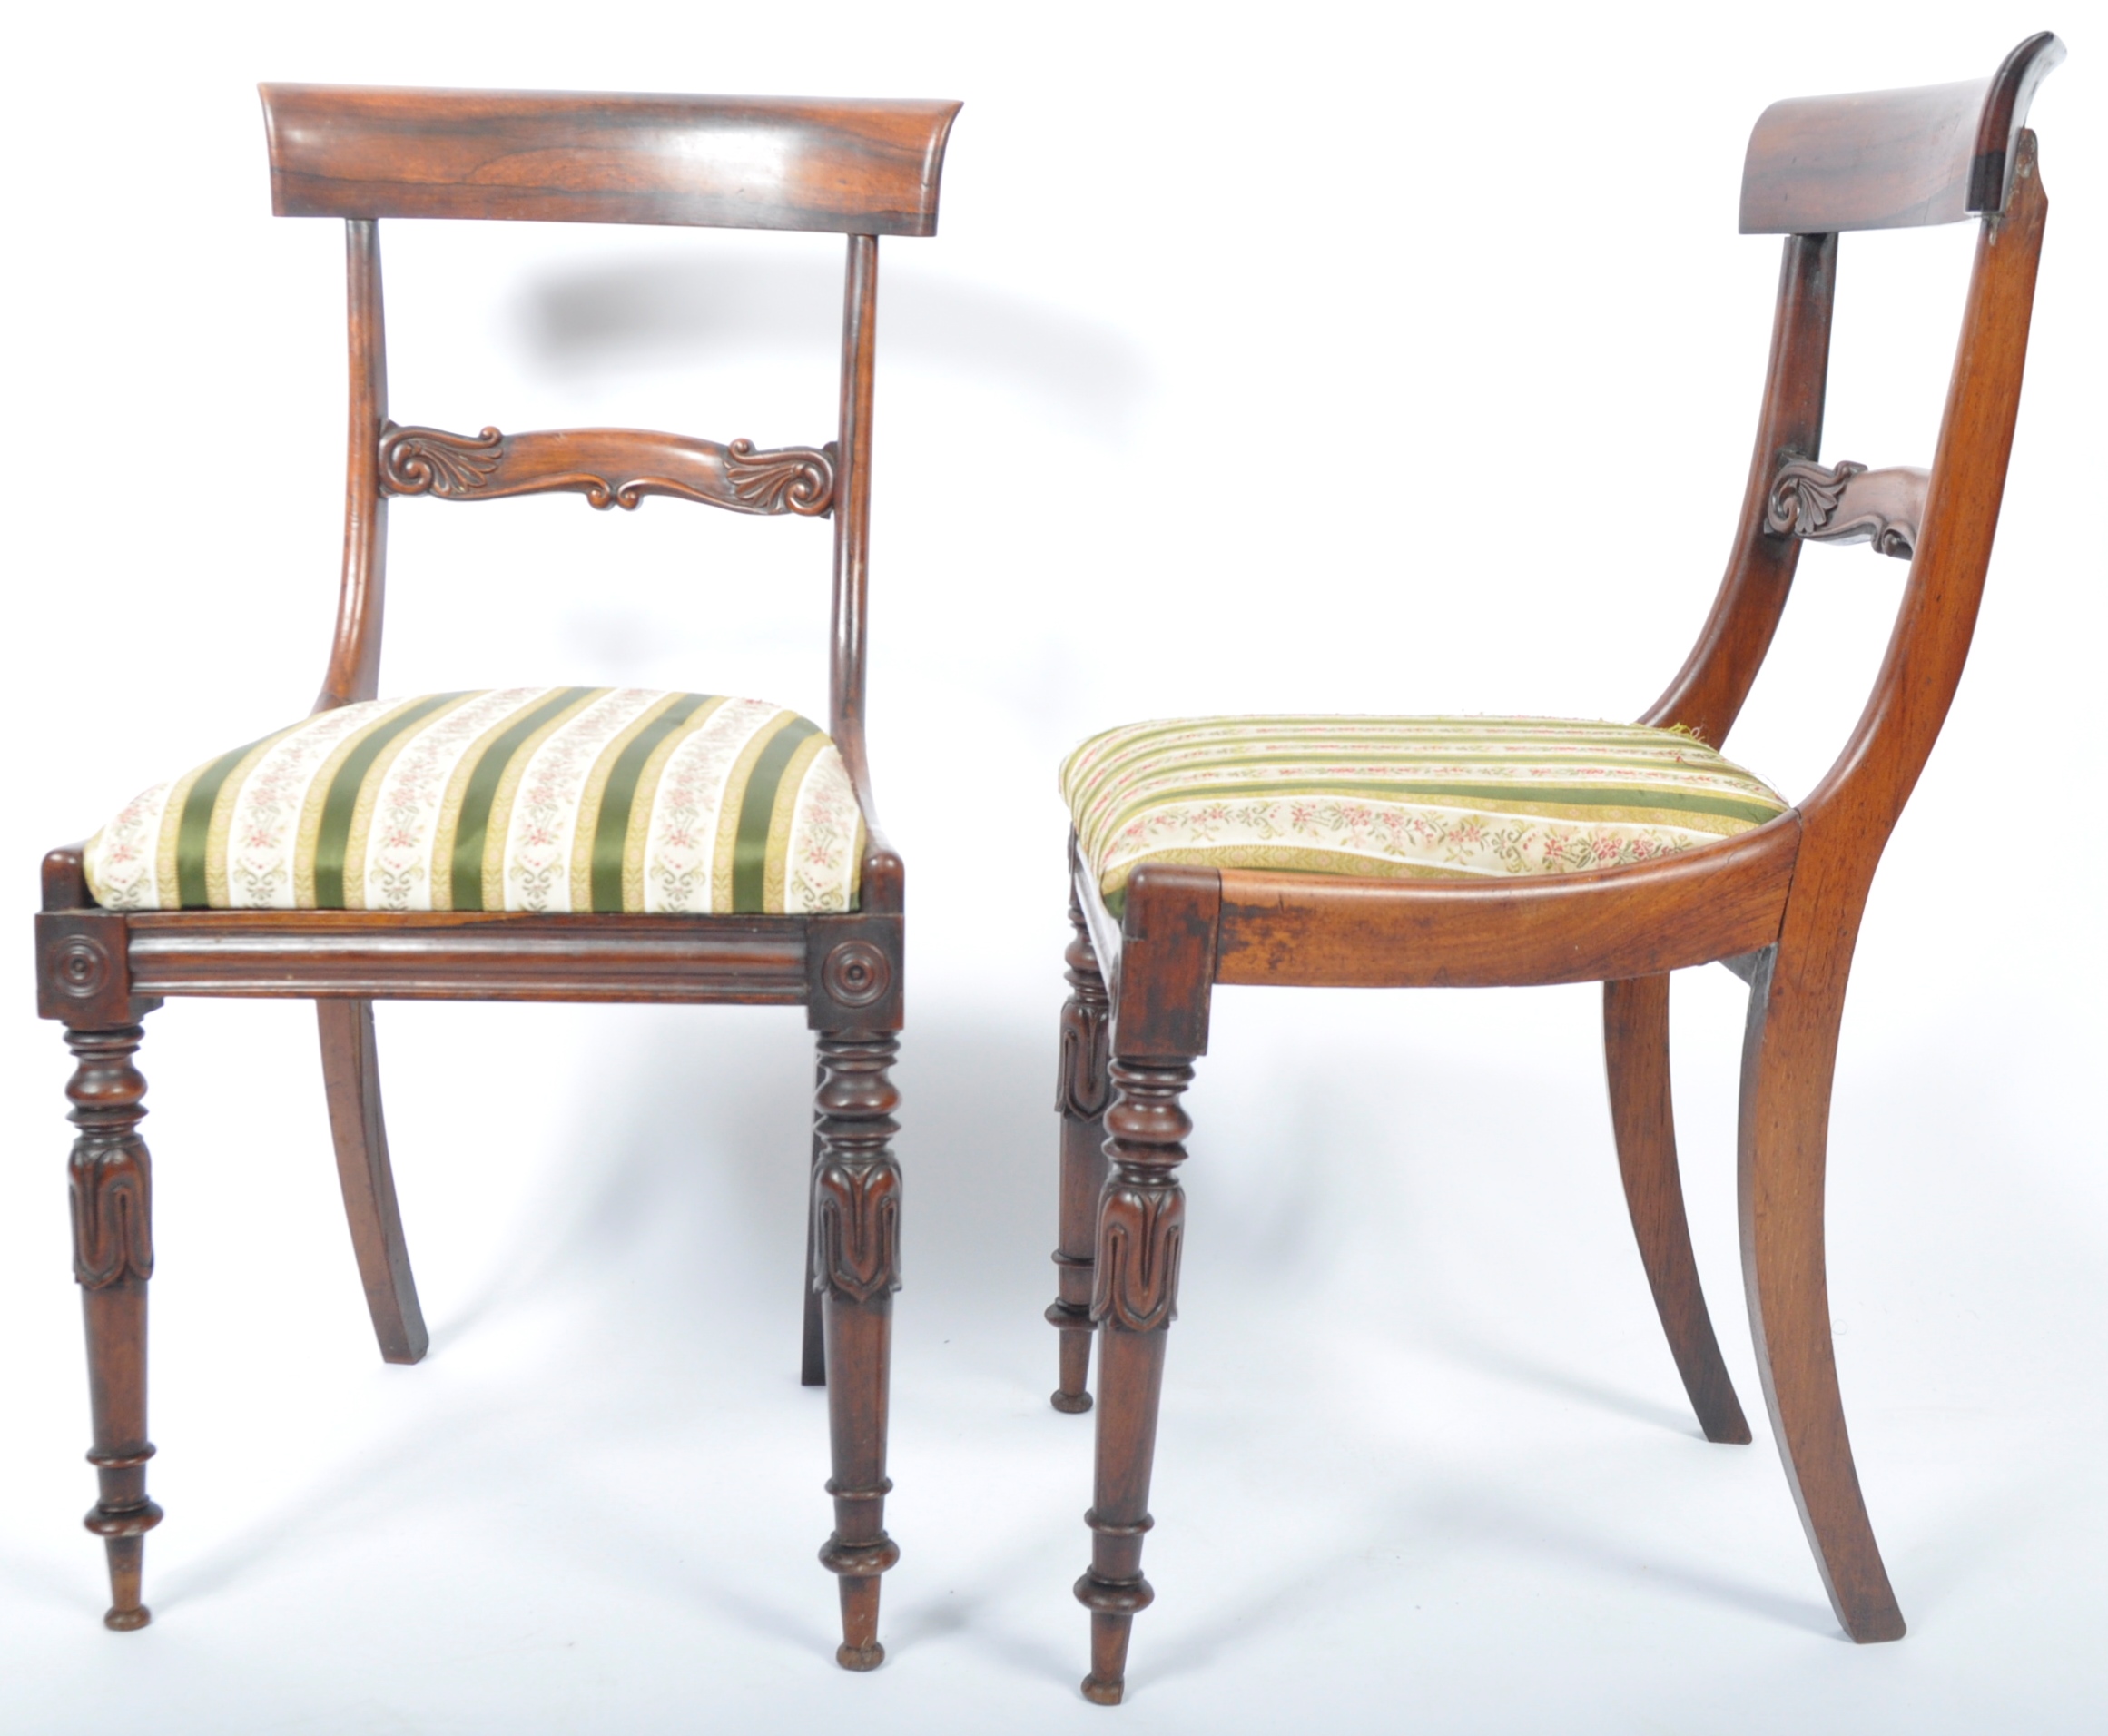 SET OF SIX ANTIQUE ROSEWOOD DINING CHAIRS IN THE GILLOWS STYLE - Image 10 of 12